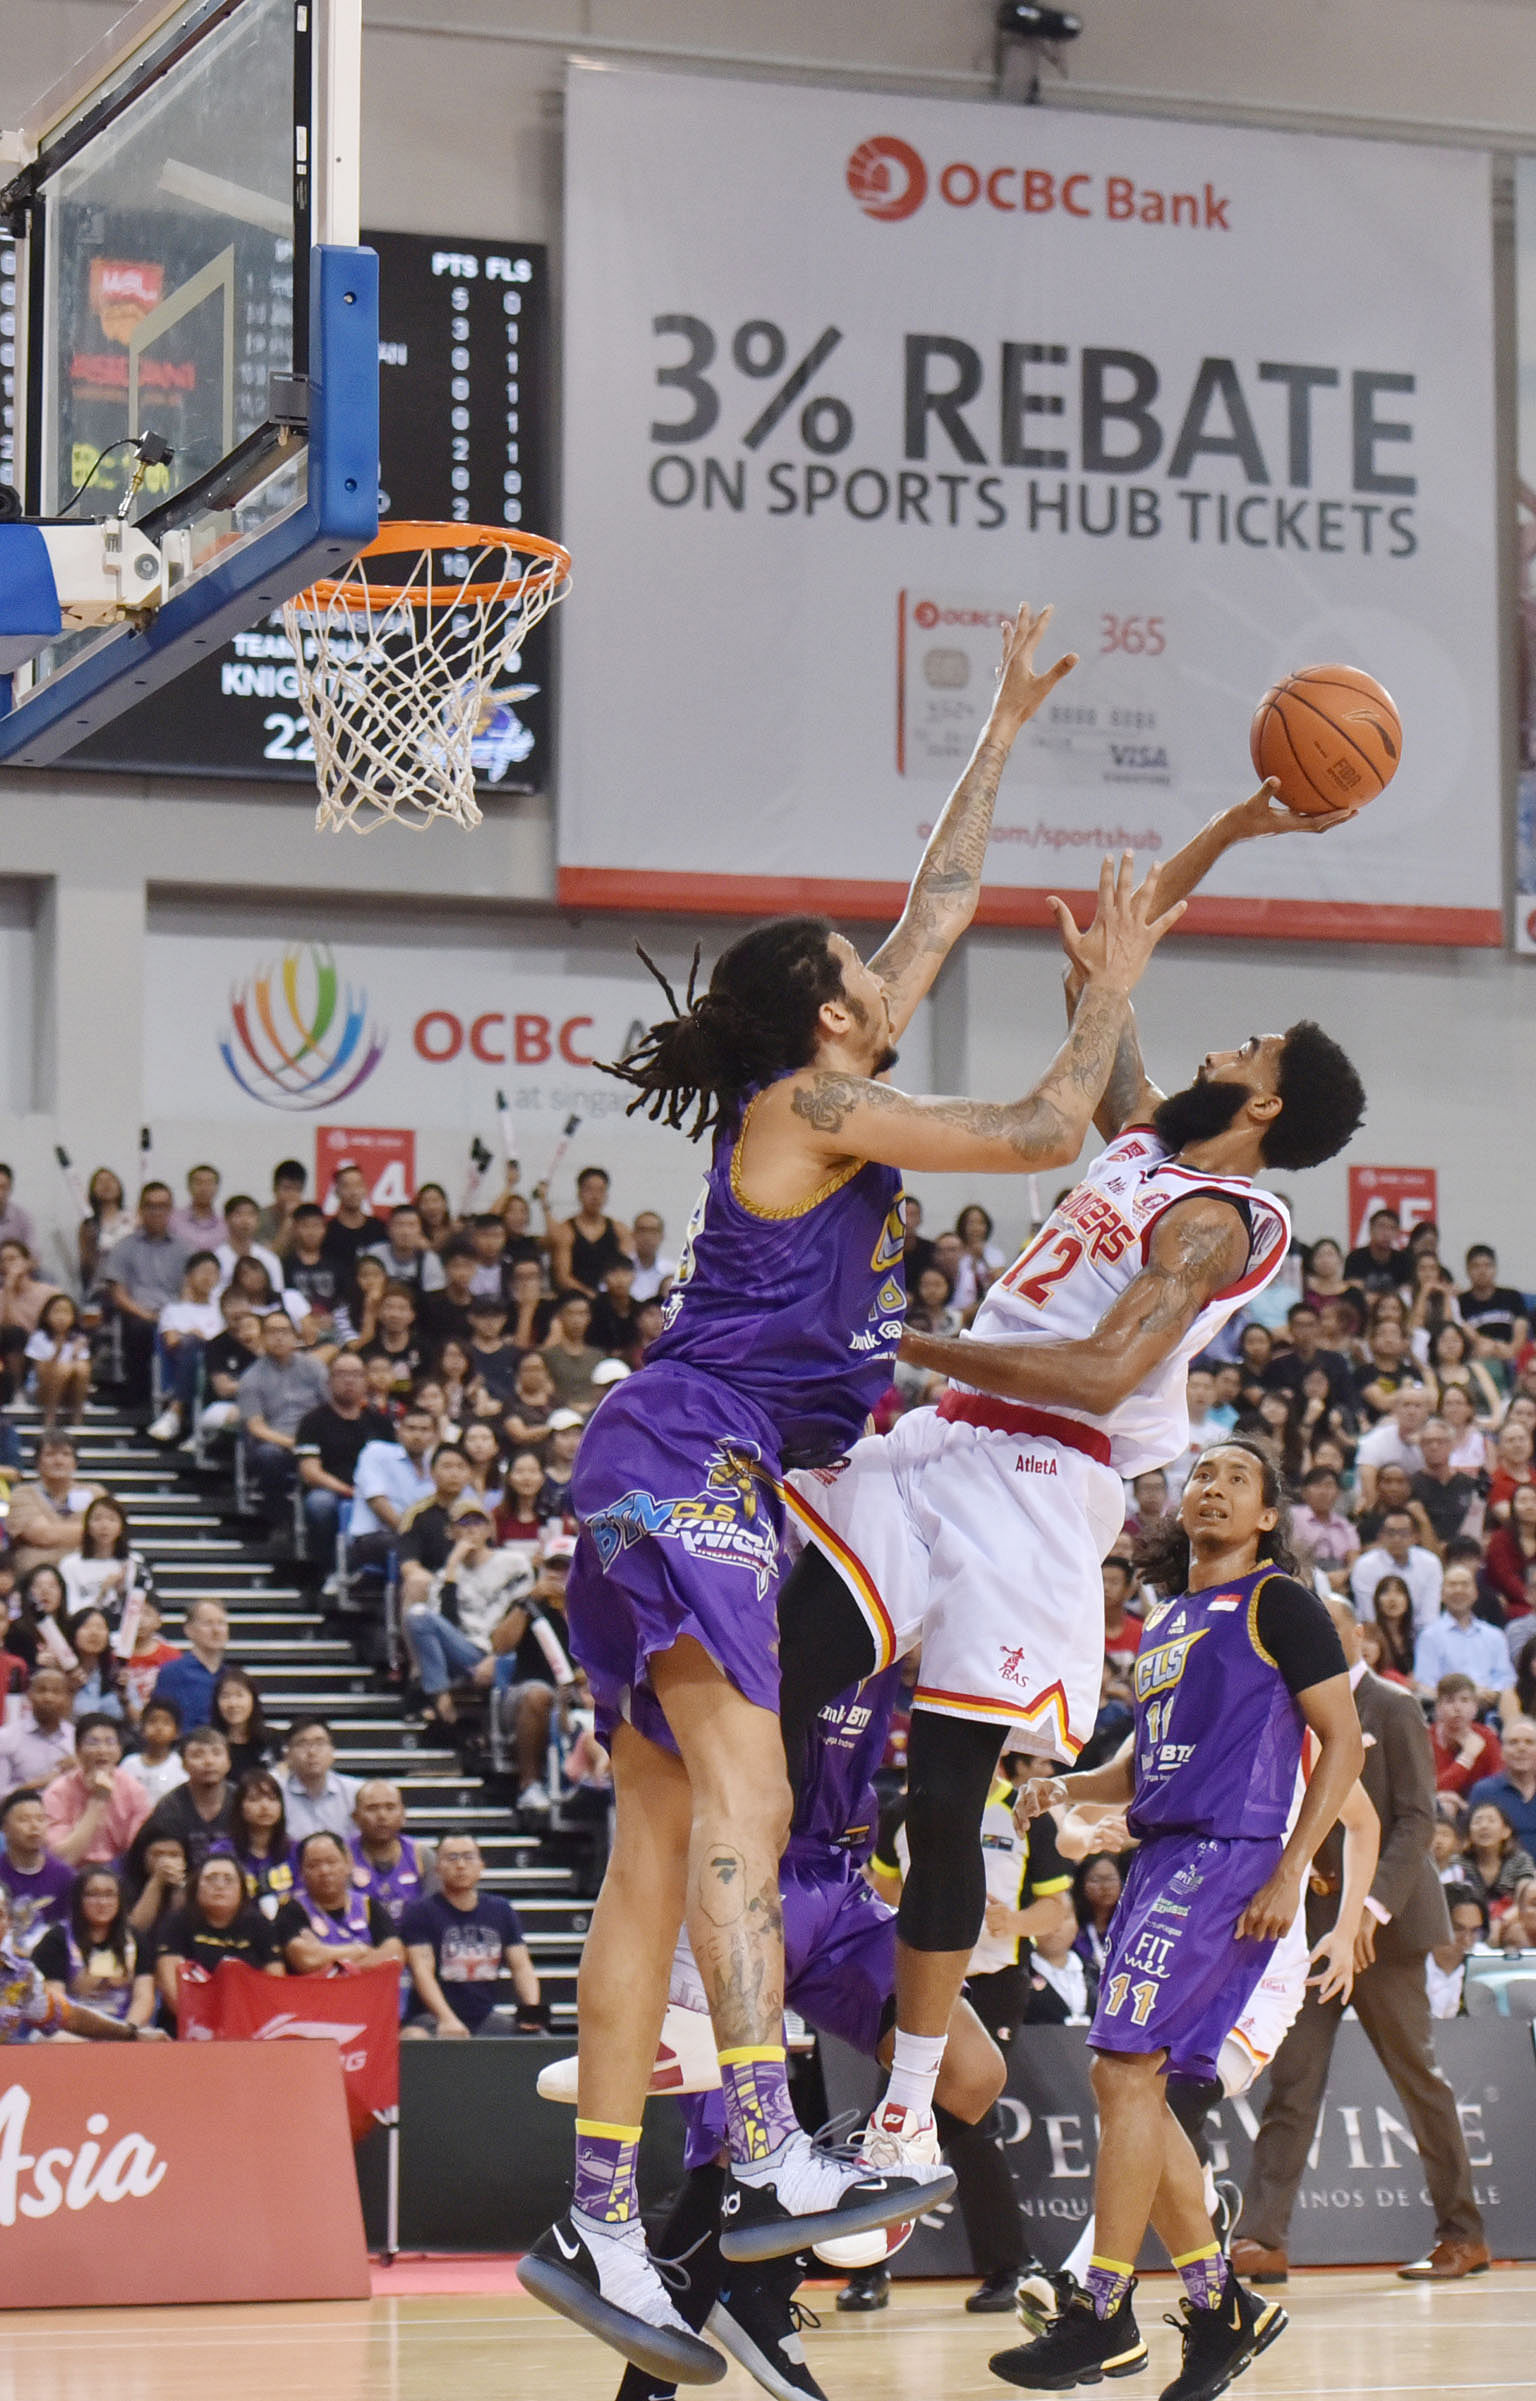 Singapore Slingers' Jerran Young taking a shot while being marked by Maxie Esho of the CLS Knights. ST PHOTO: JASMINE CHOONG